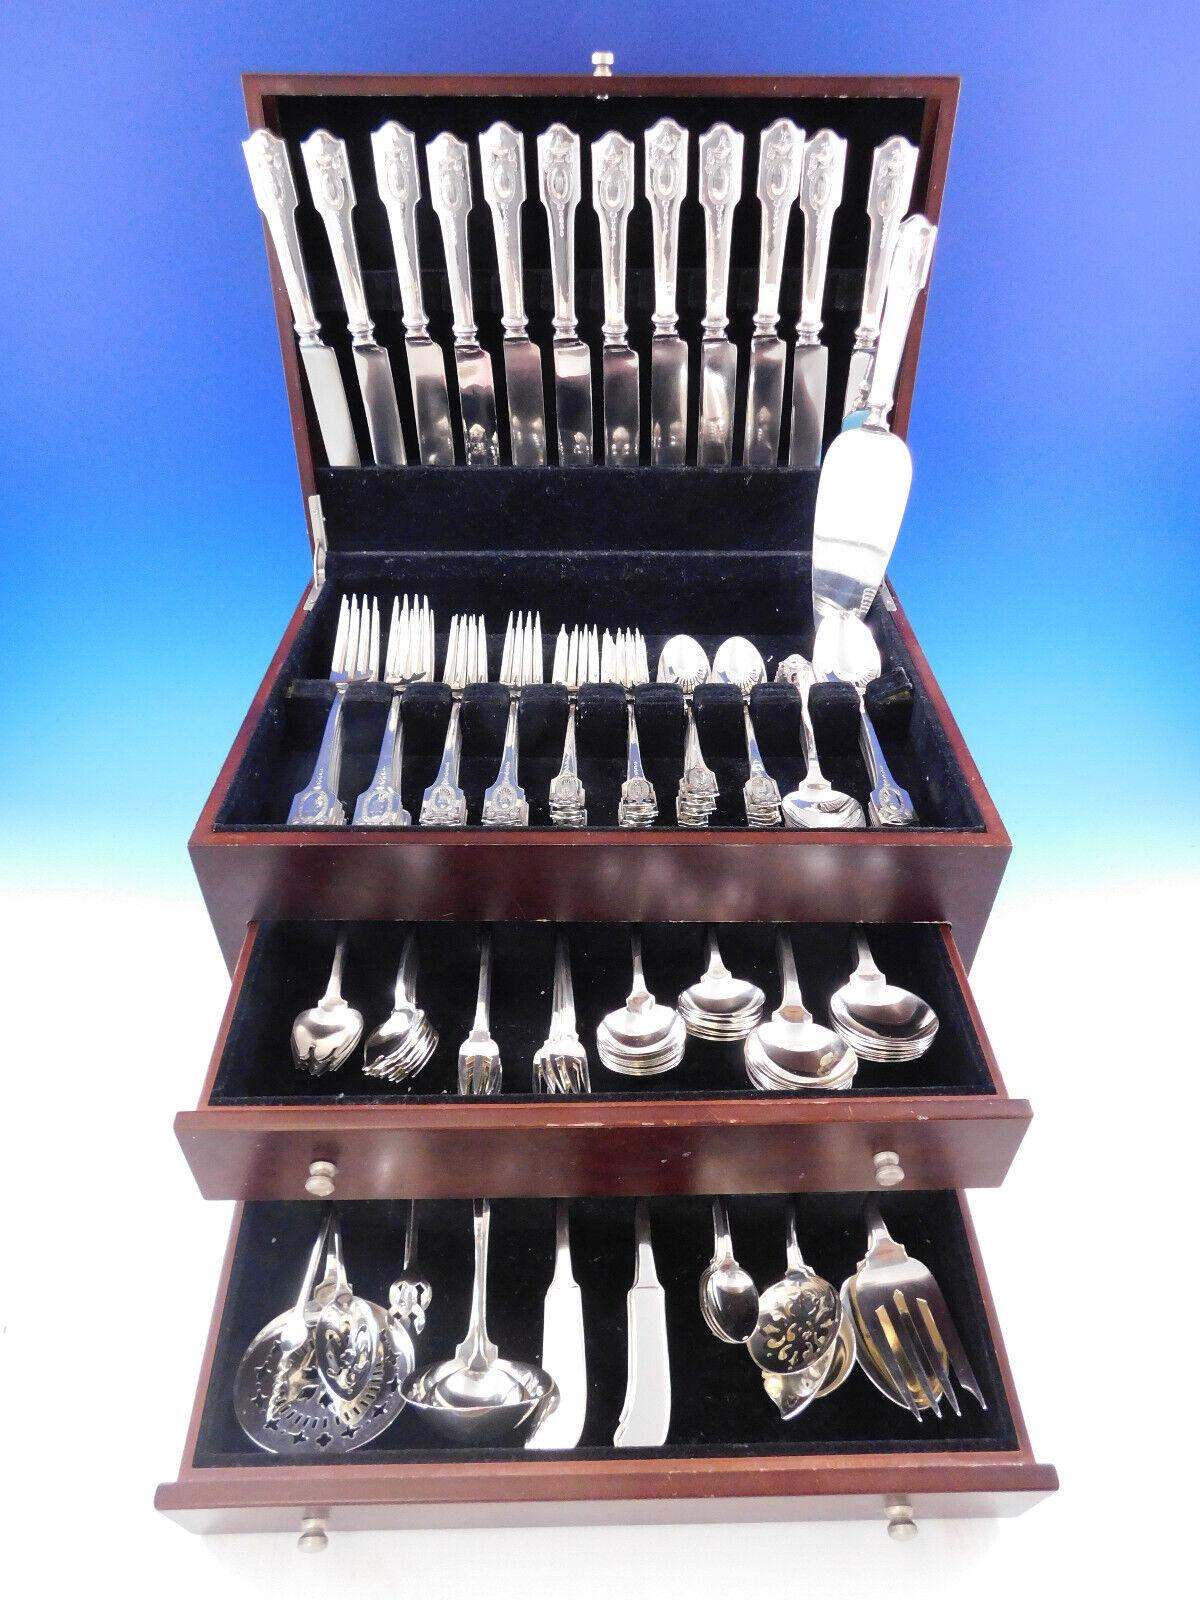 Rare monumental dinner size Adam by Shreve sterling silver Flatware set - 156 pieces. This pattern was introduced in the year 1909. This set includes:

12 Dinner knives, 9 3/4